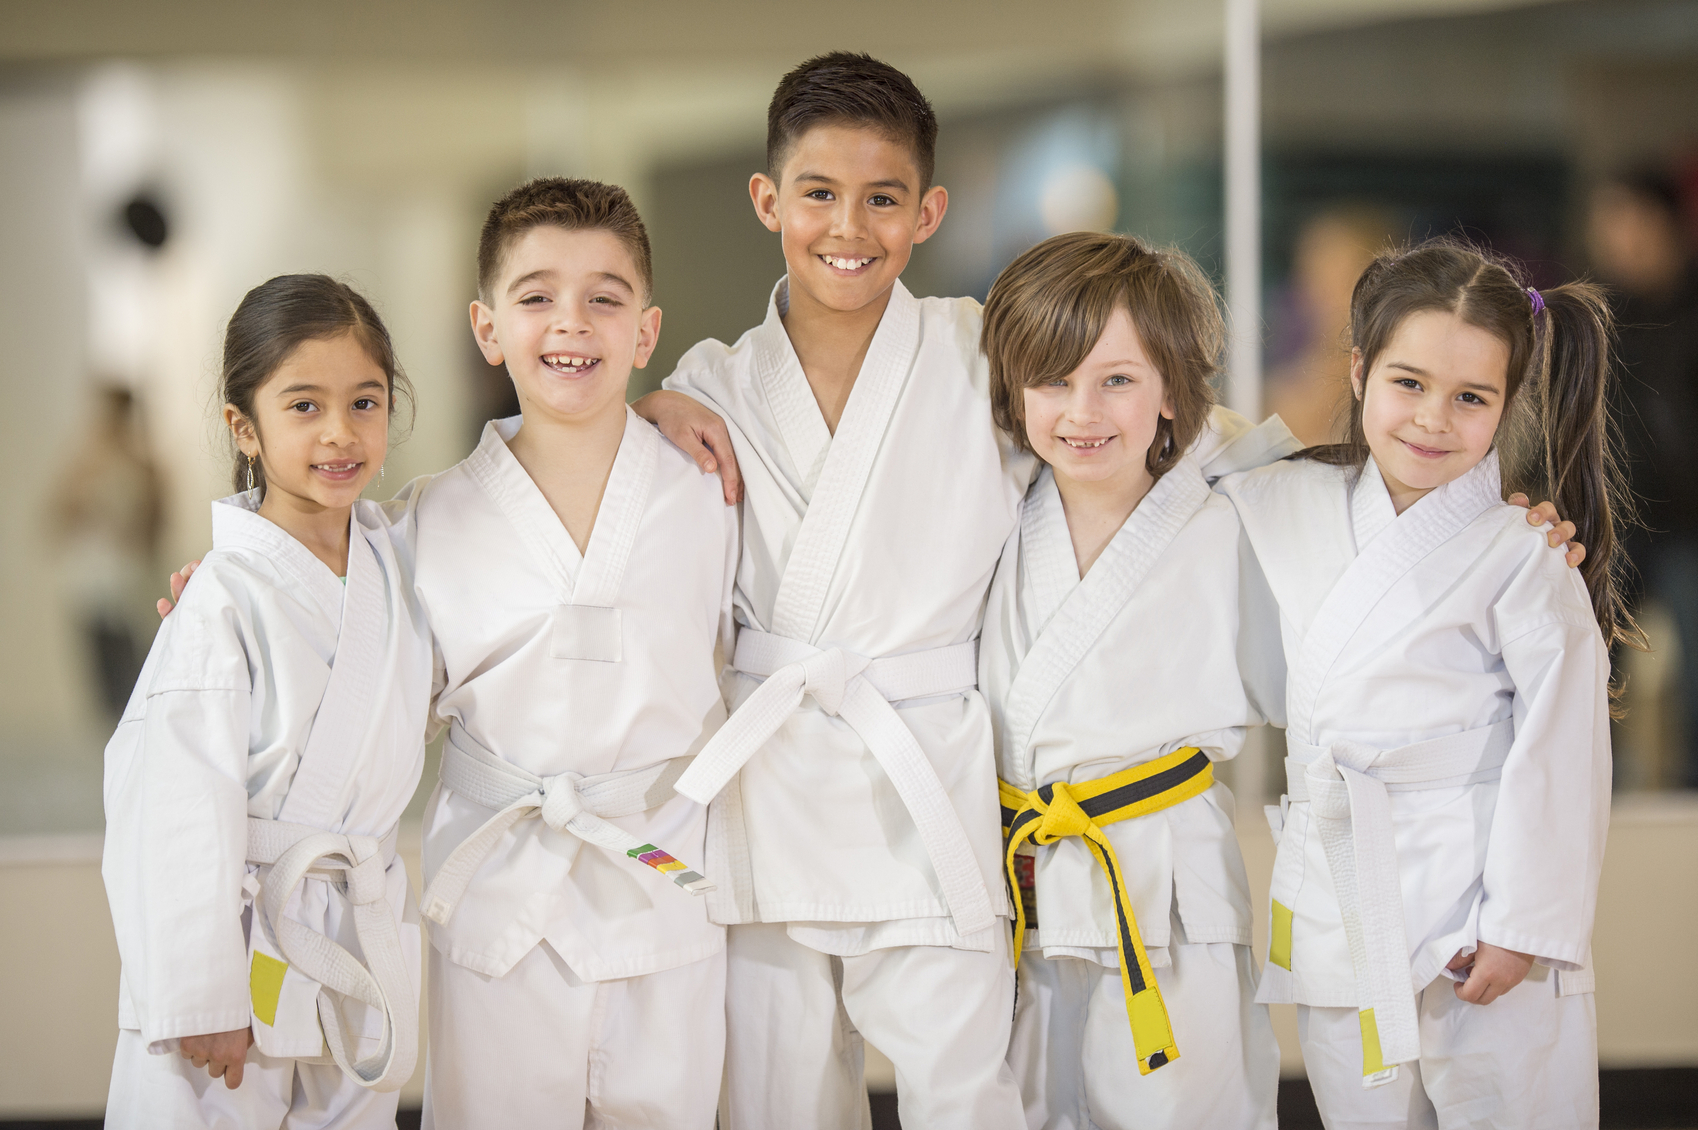 Karate classes for kids